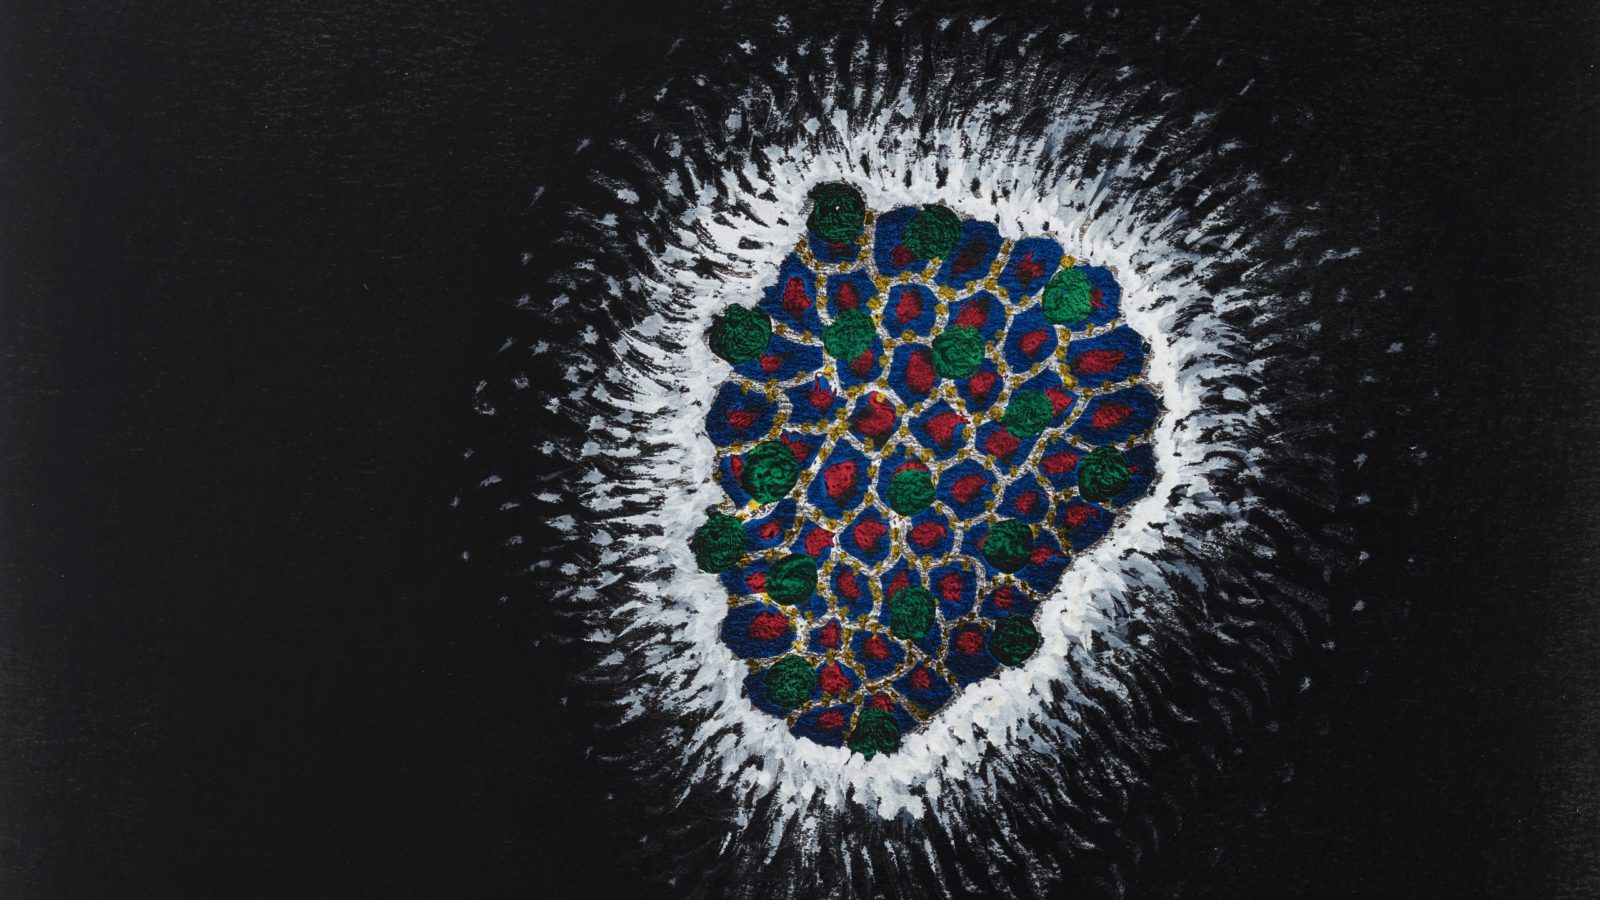 Here’s your chance to bid on previously unseen work by Yayoi Kusama